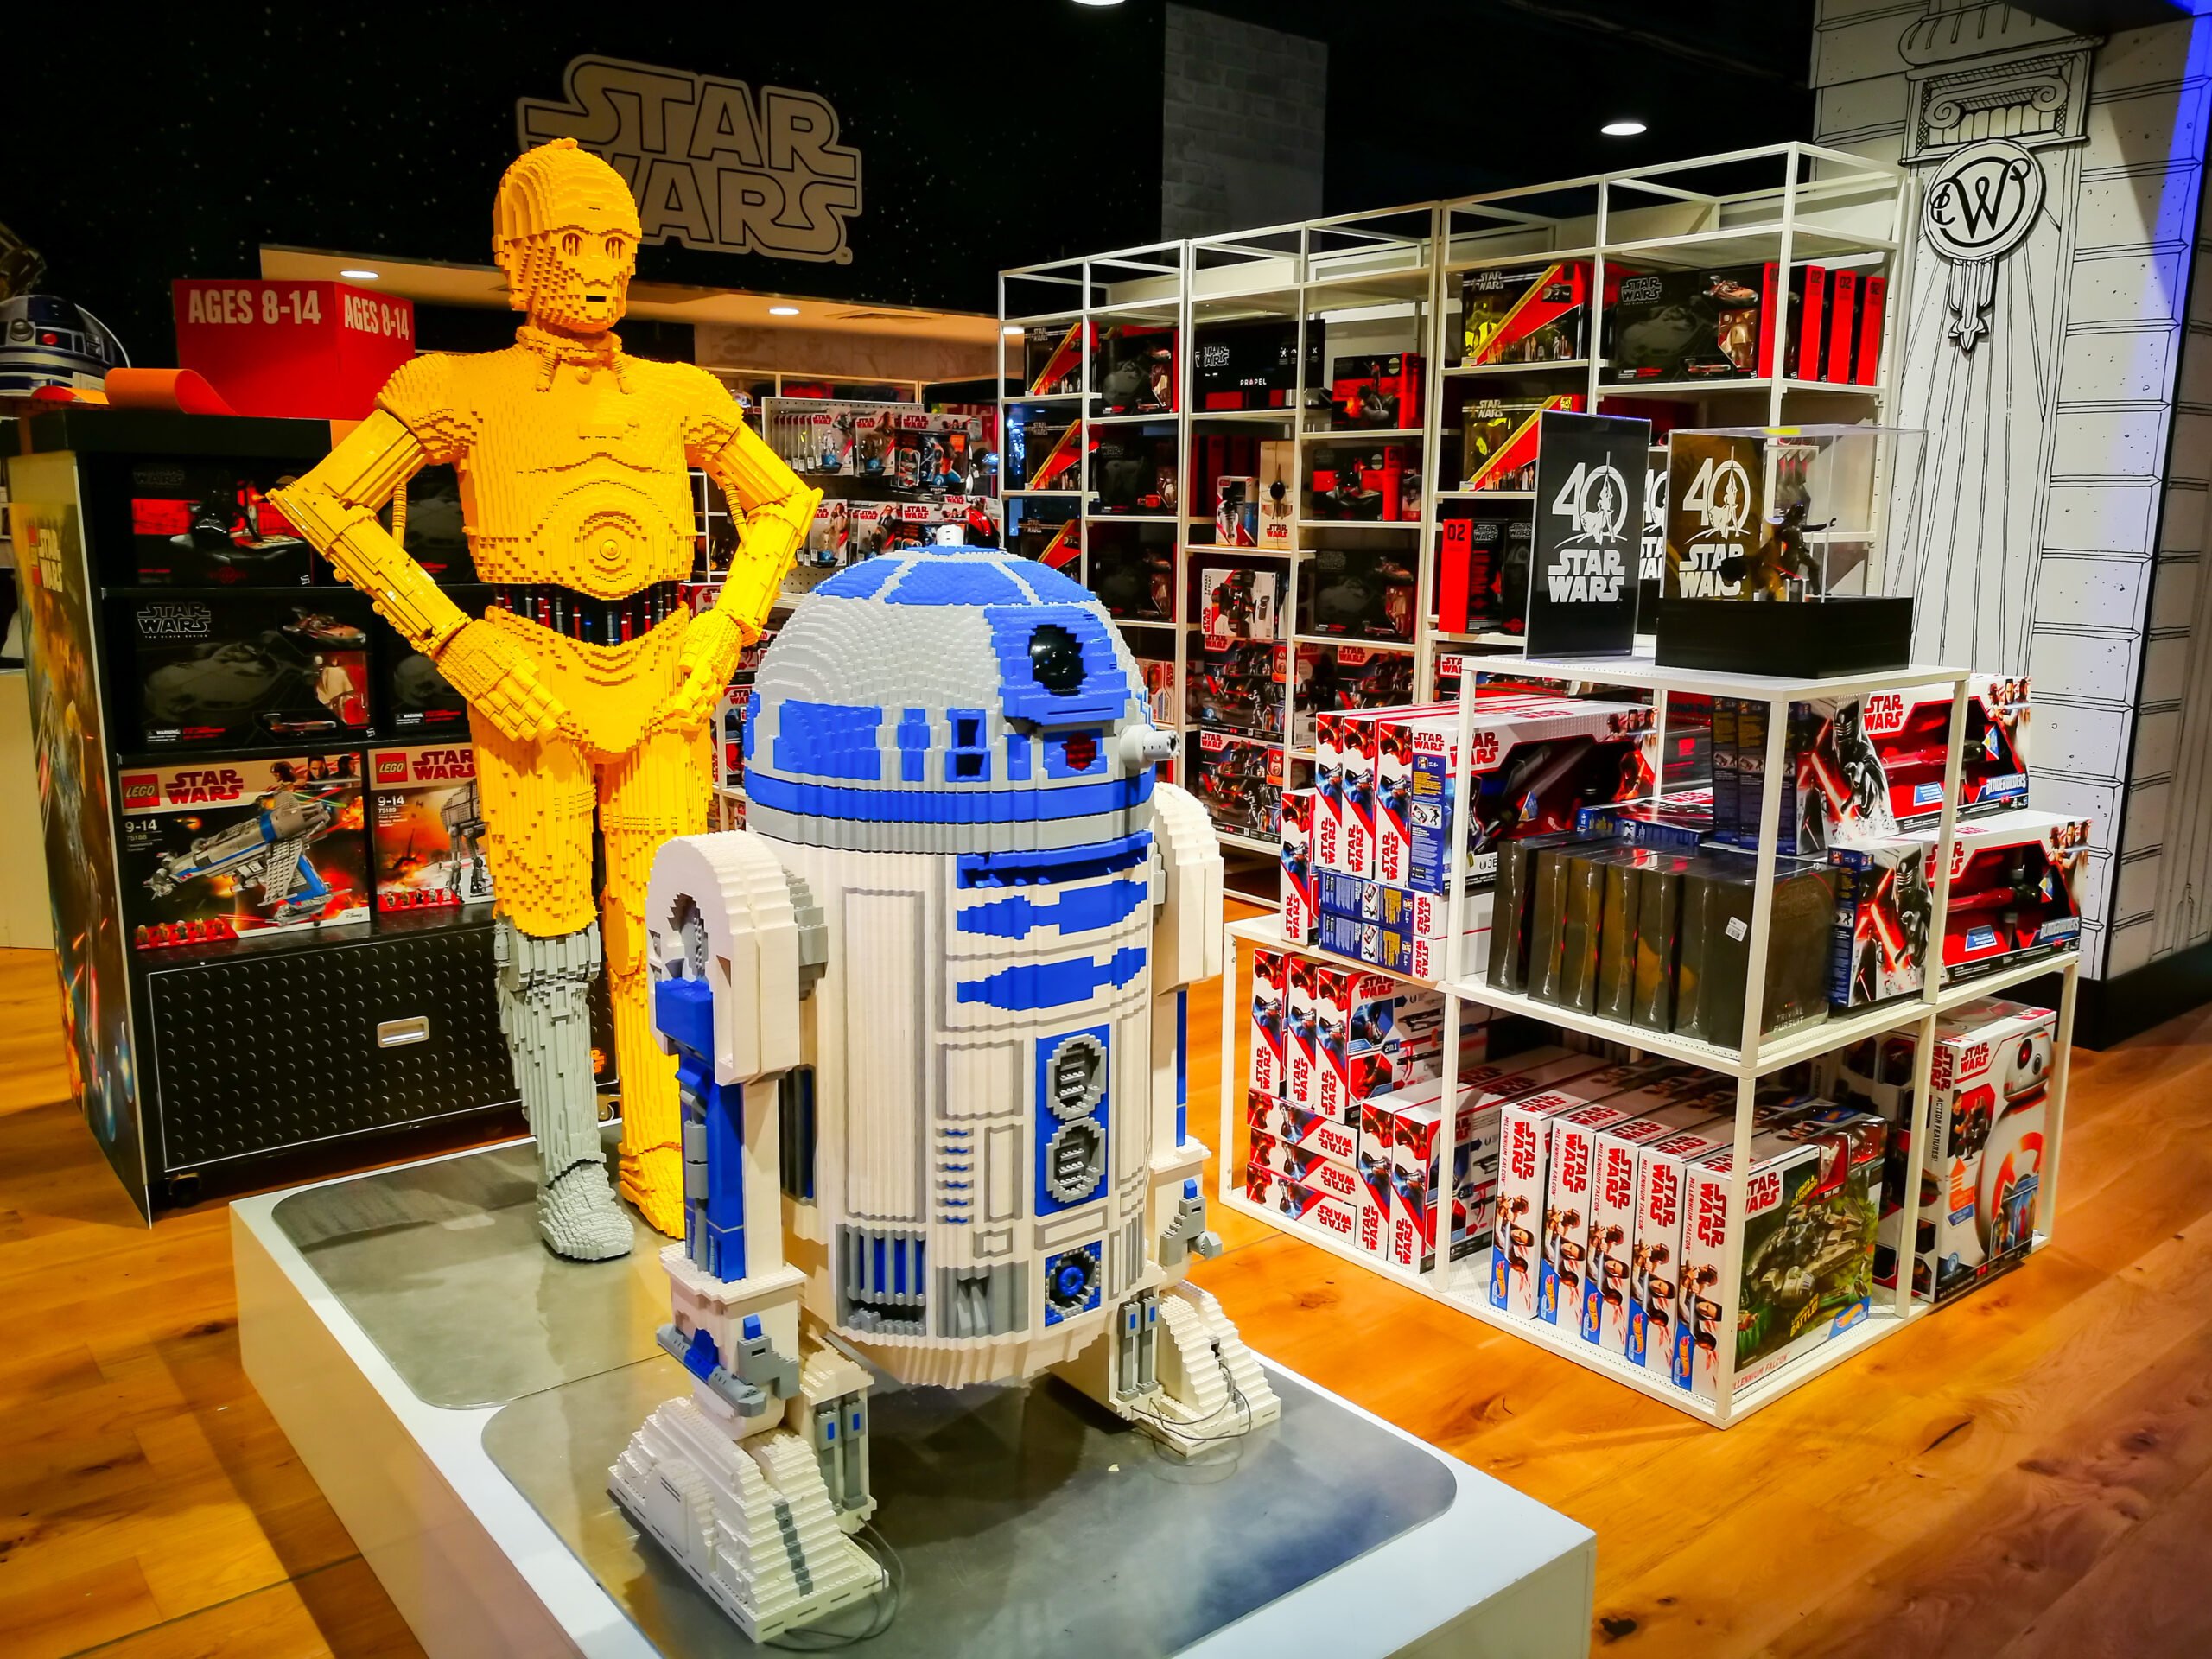 Lego Collectibles as an Investment? Why a Set of Themed Lego can Eventually be Worth its Weight in Gold